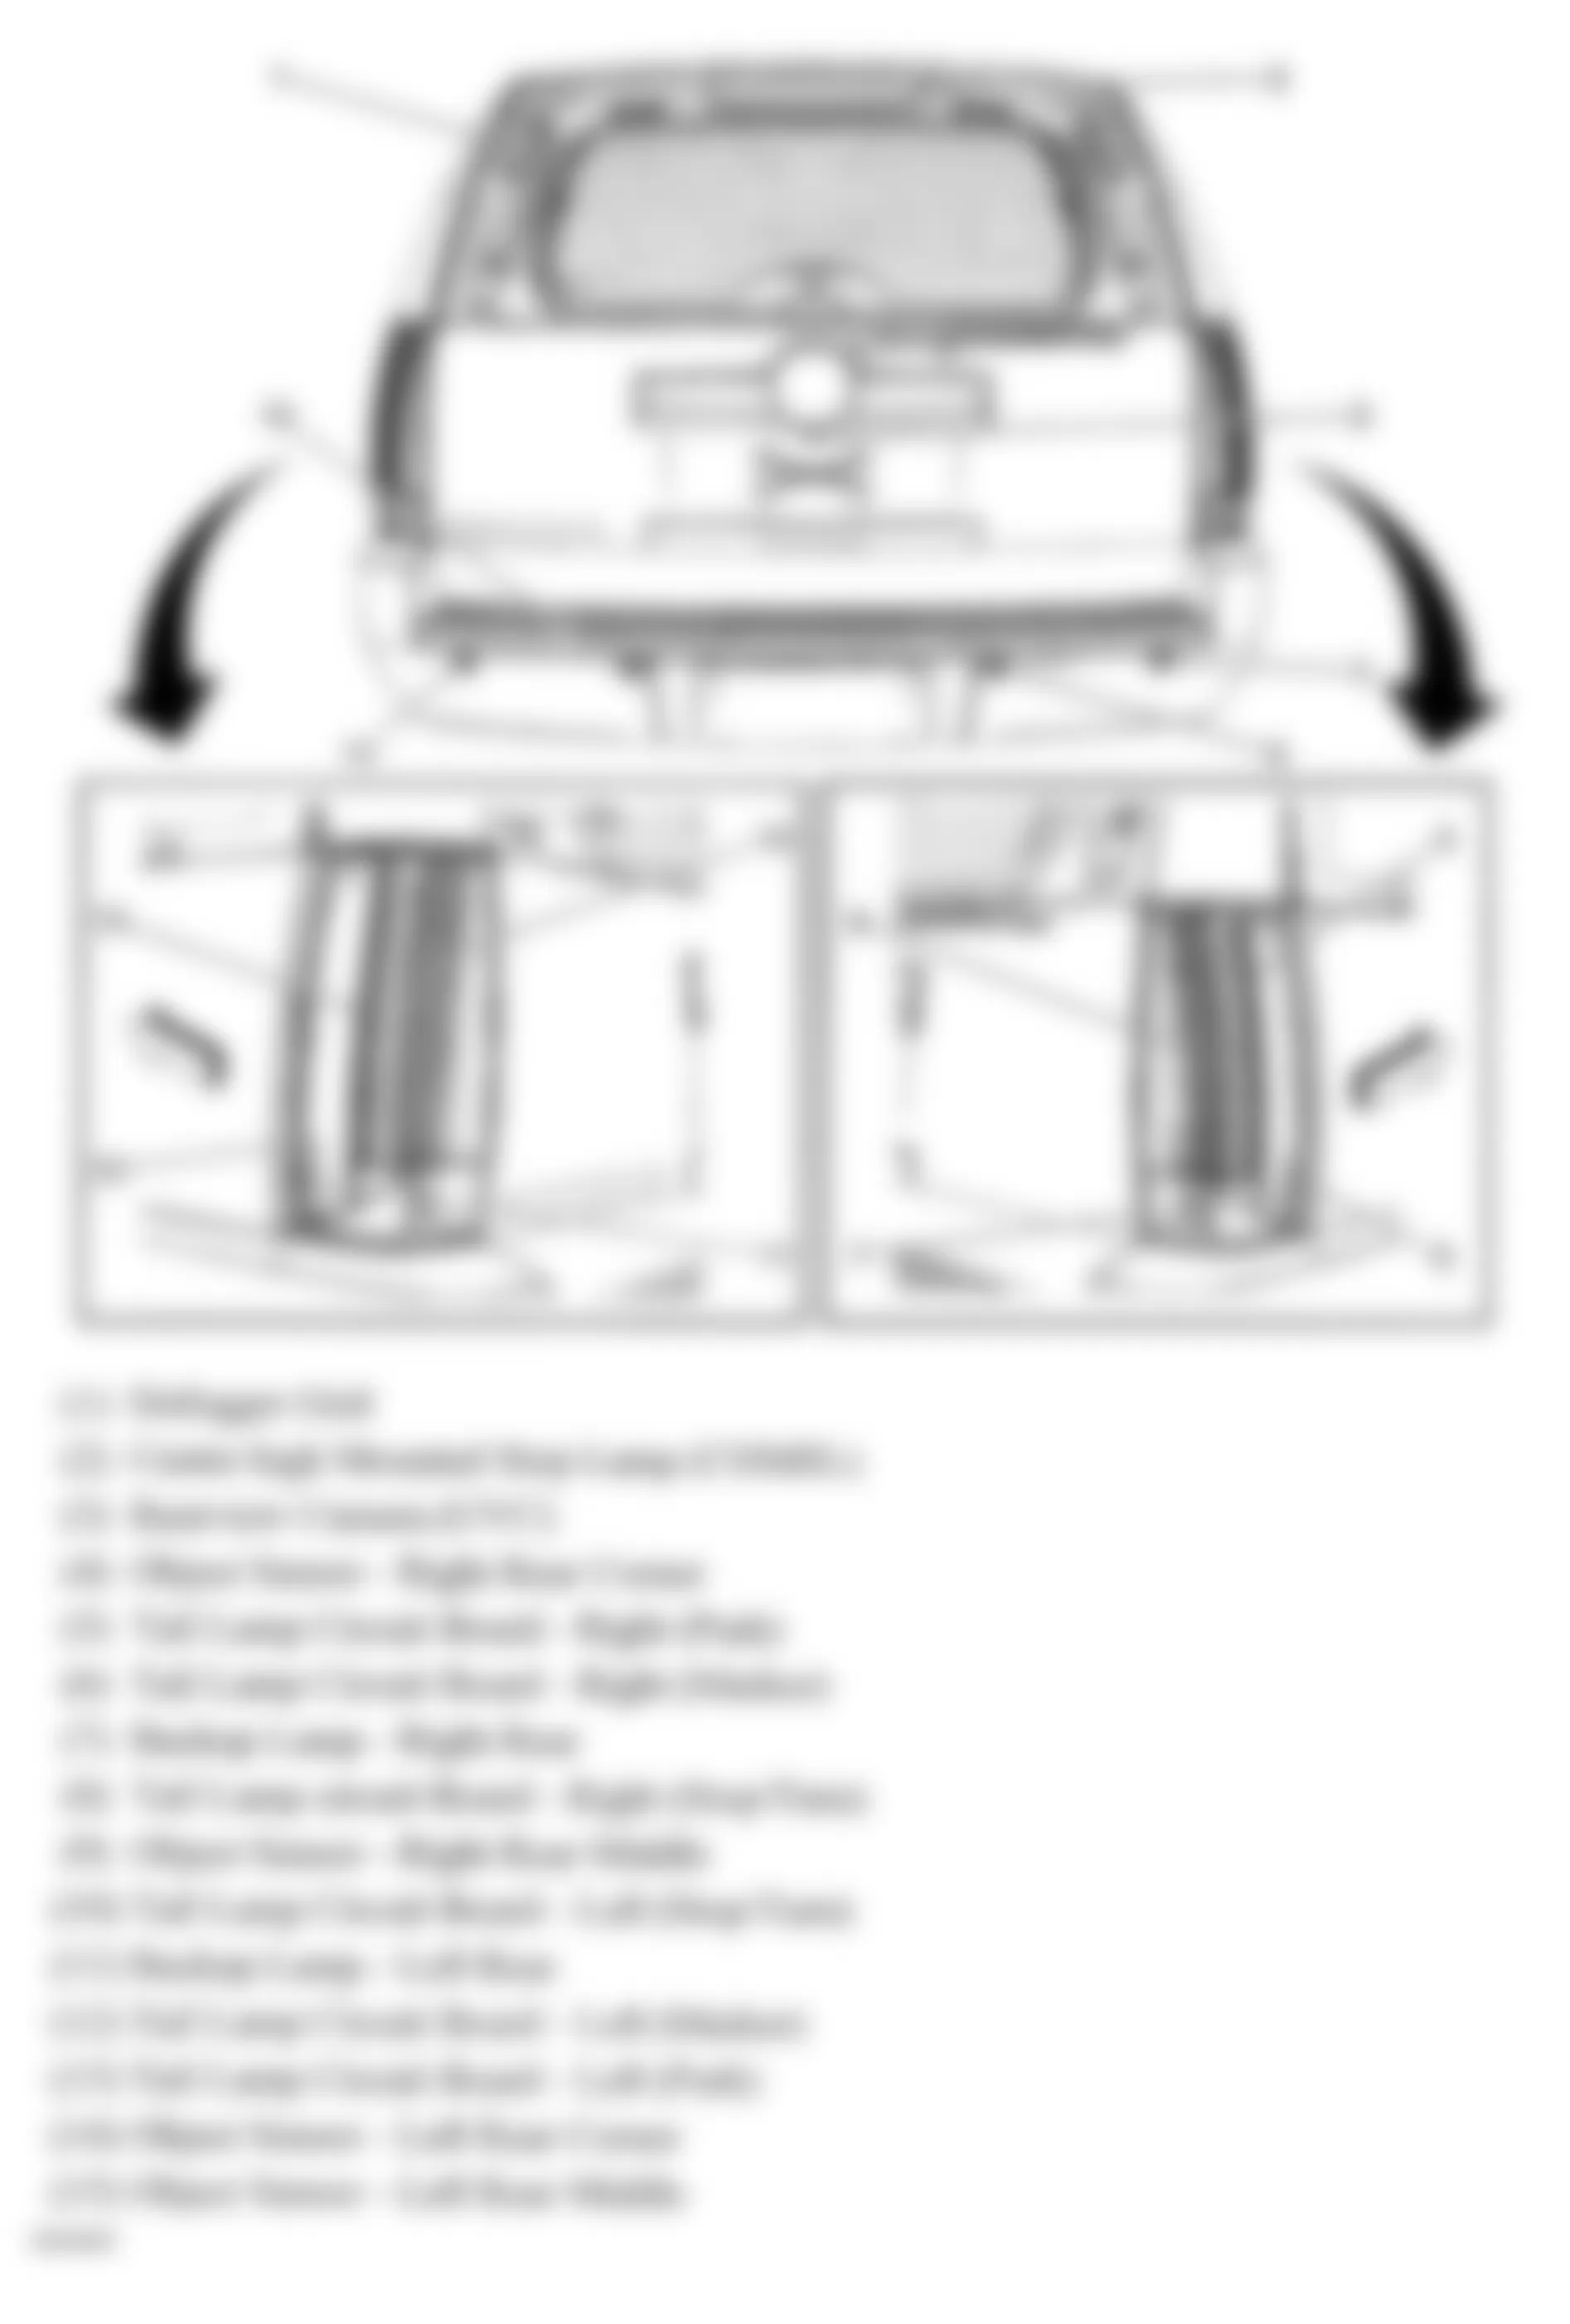 GMC Yukon 2010 - Component Locations -  Rear Of Vehicle (Tahoe & Escalade W/One Piece Liftgate)